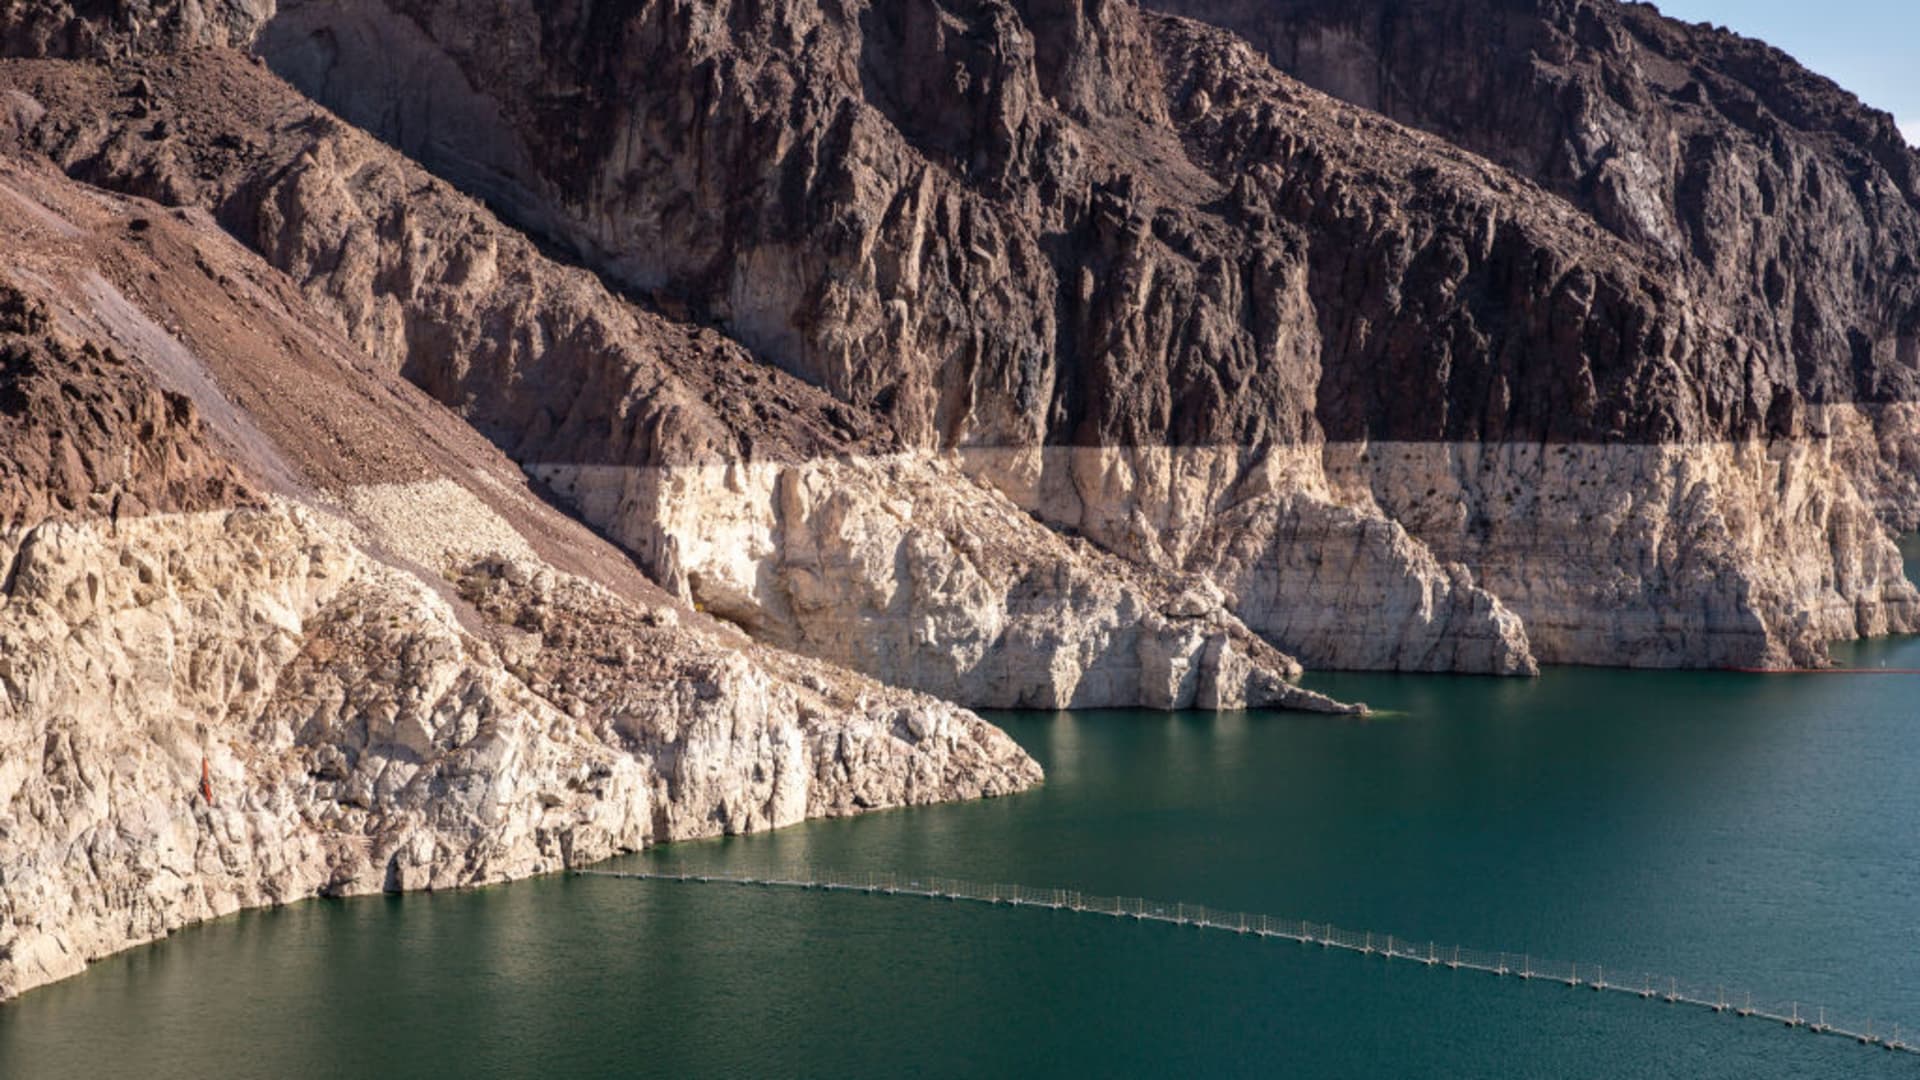 Feds call for water cutbacks ‘to avoid a catastrophic collapse’ of Colorado River